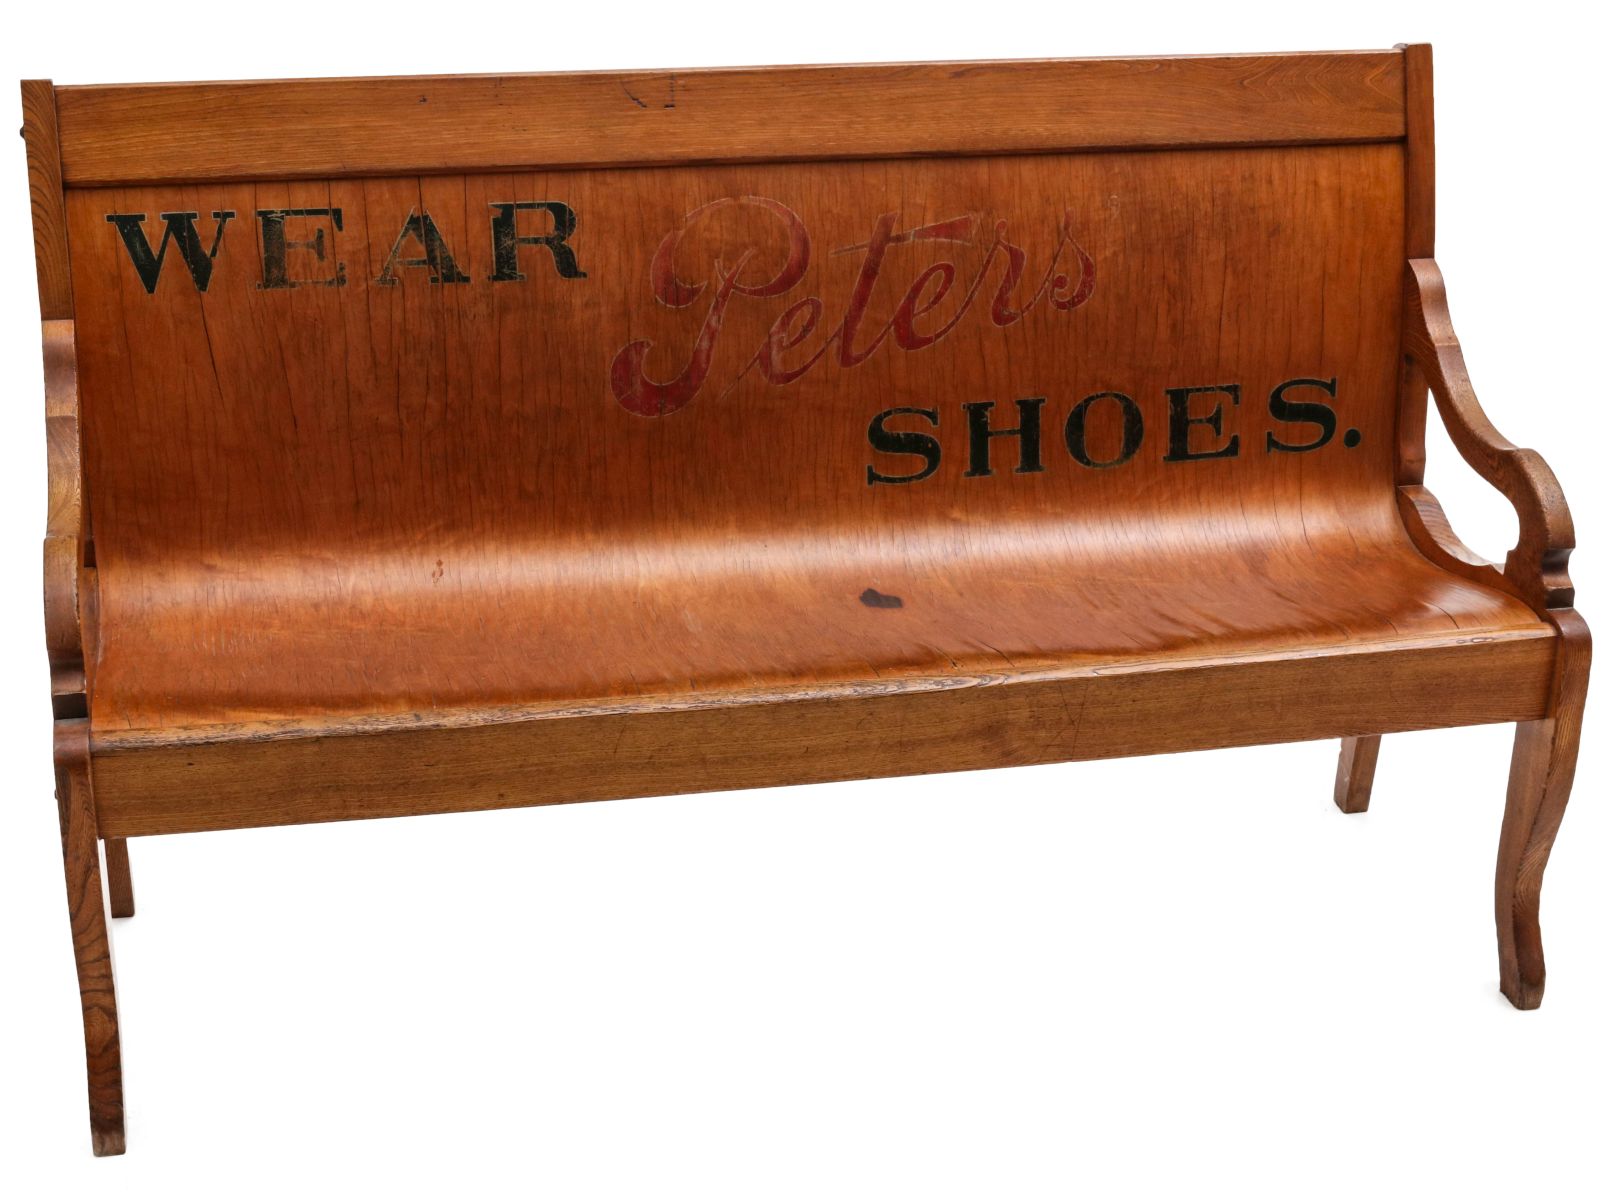 A PETERS SHOES BENTWOOD BENCH WITH ADVERTISING C. 1920